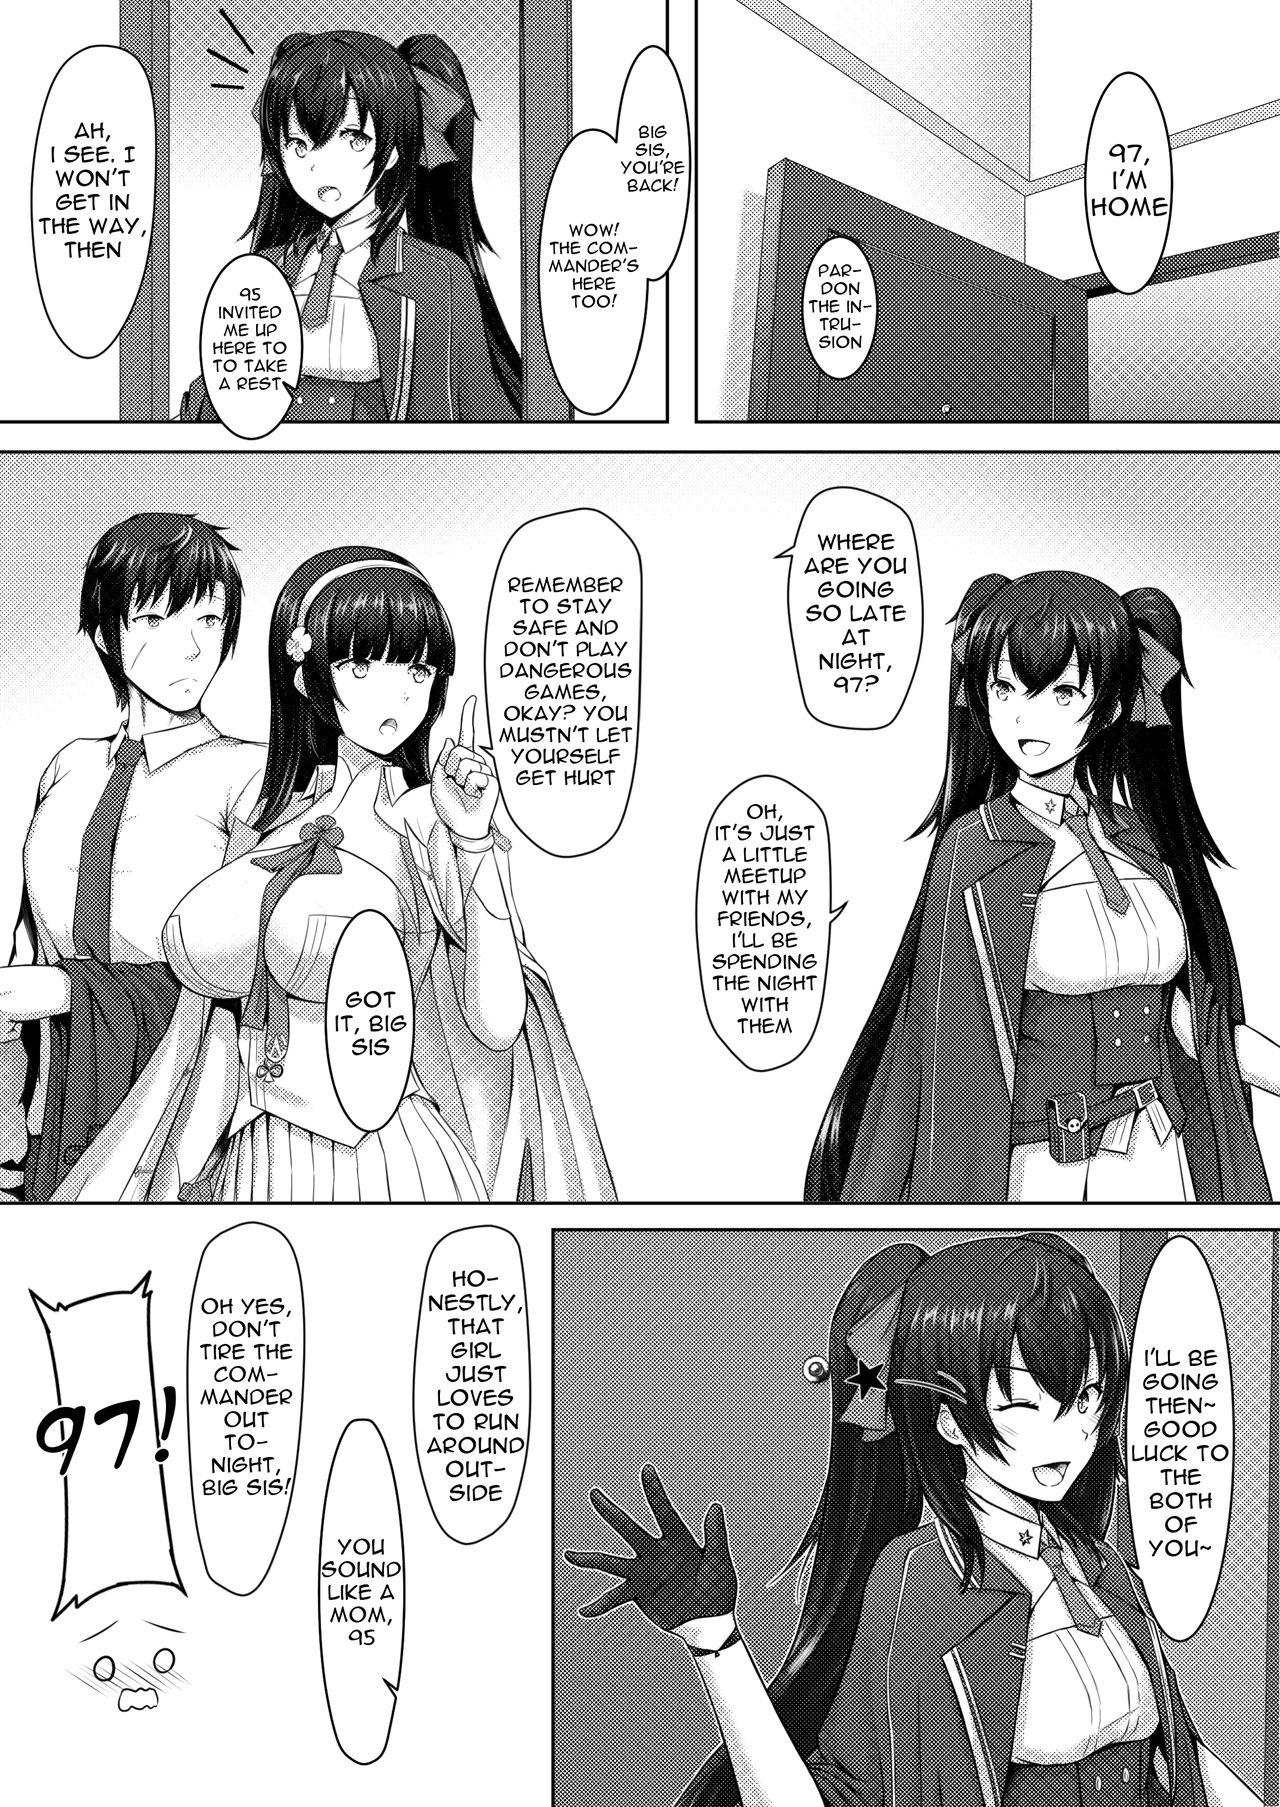 Tinder A Lovely Flower's Gift - Girls frontline Colombian - Page 4